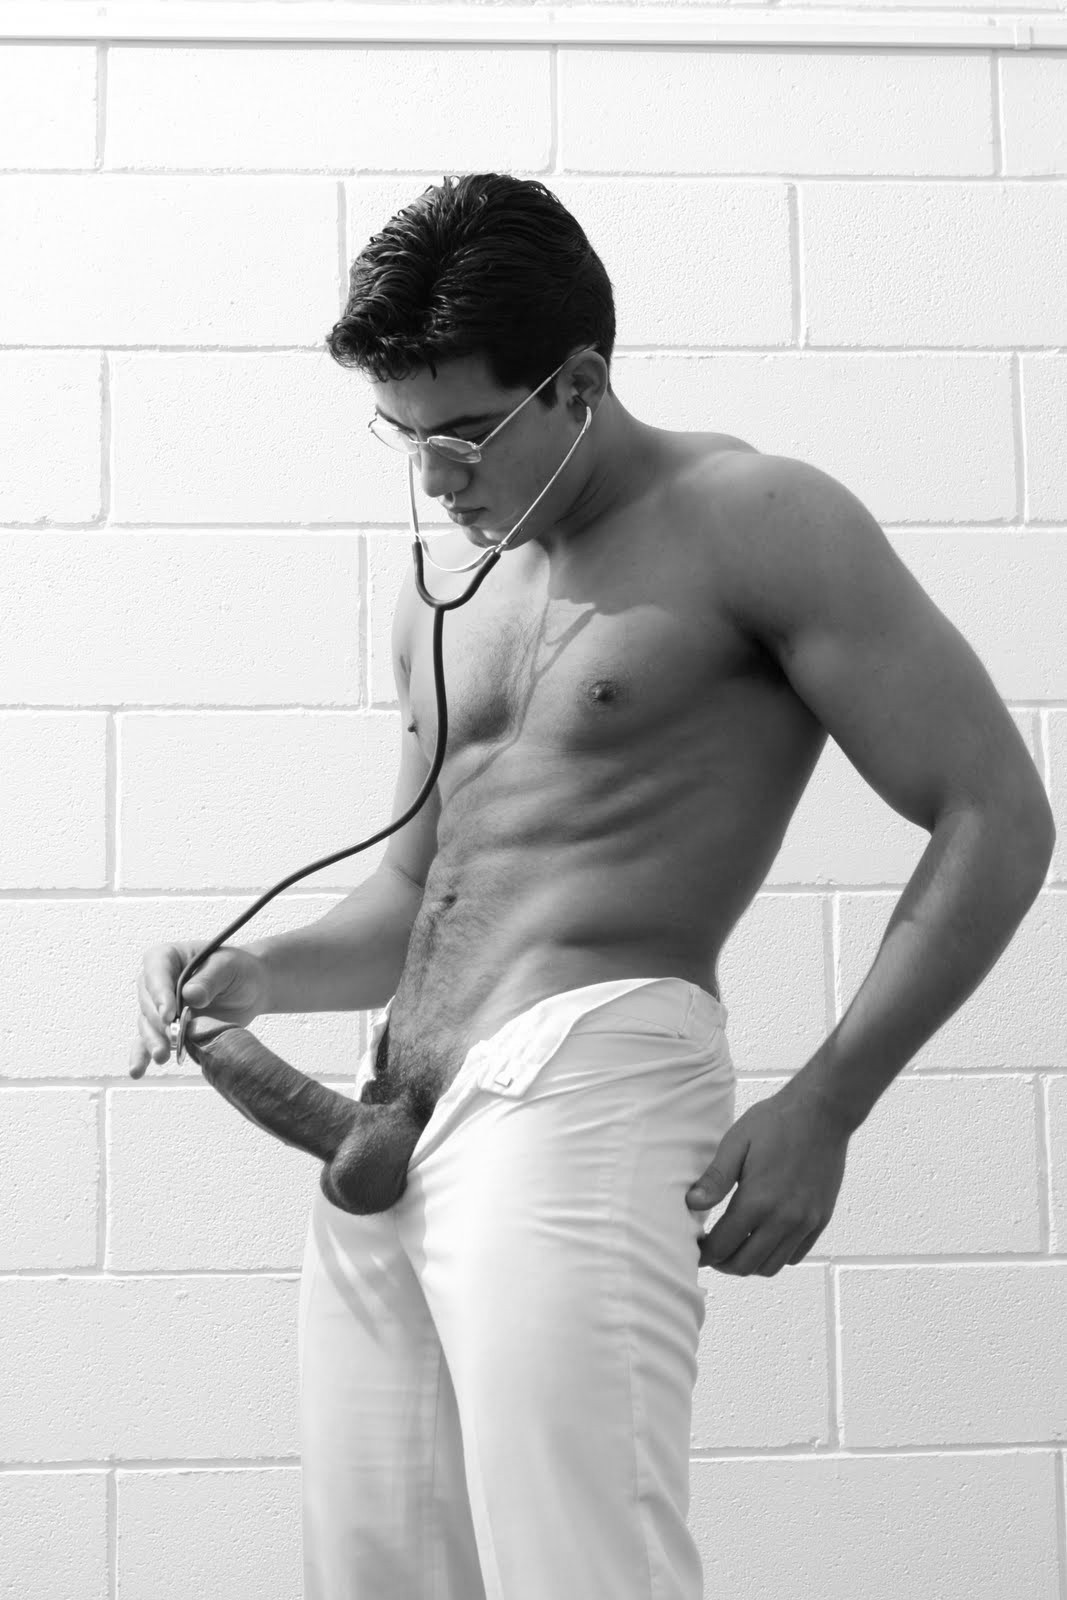 This Doctor can certainly give me a physical 